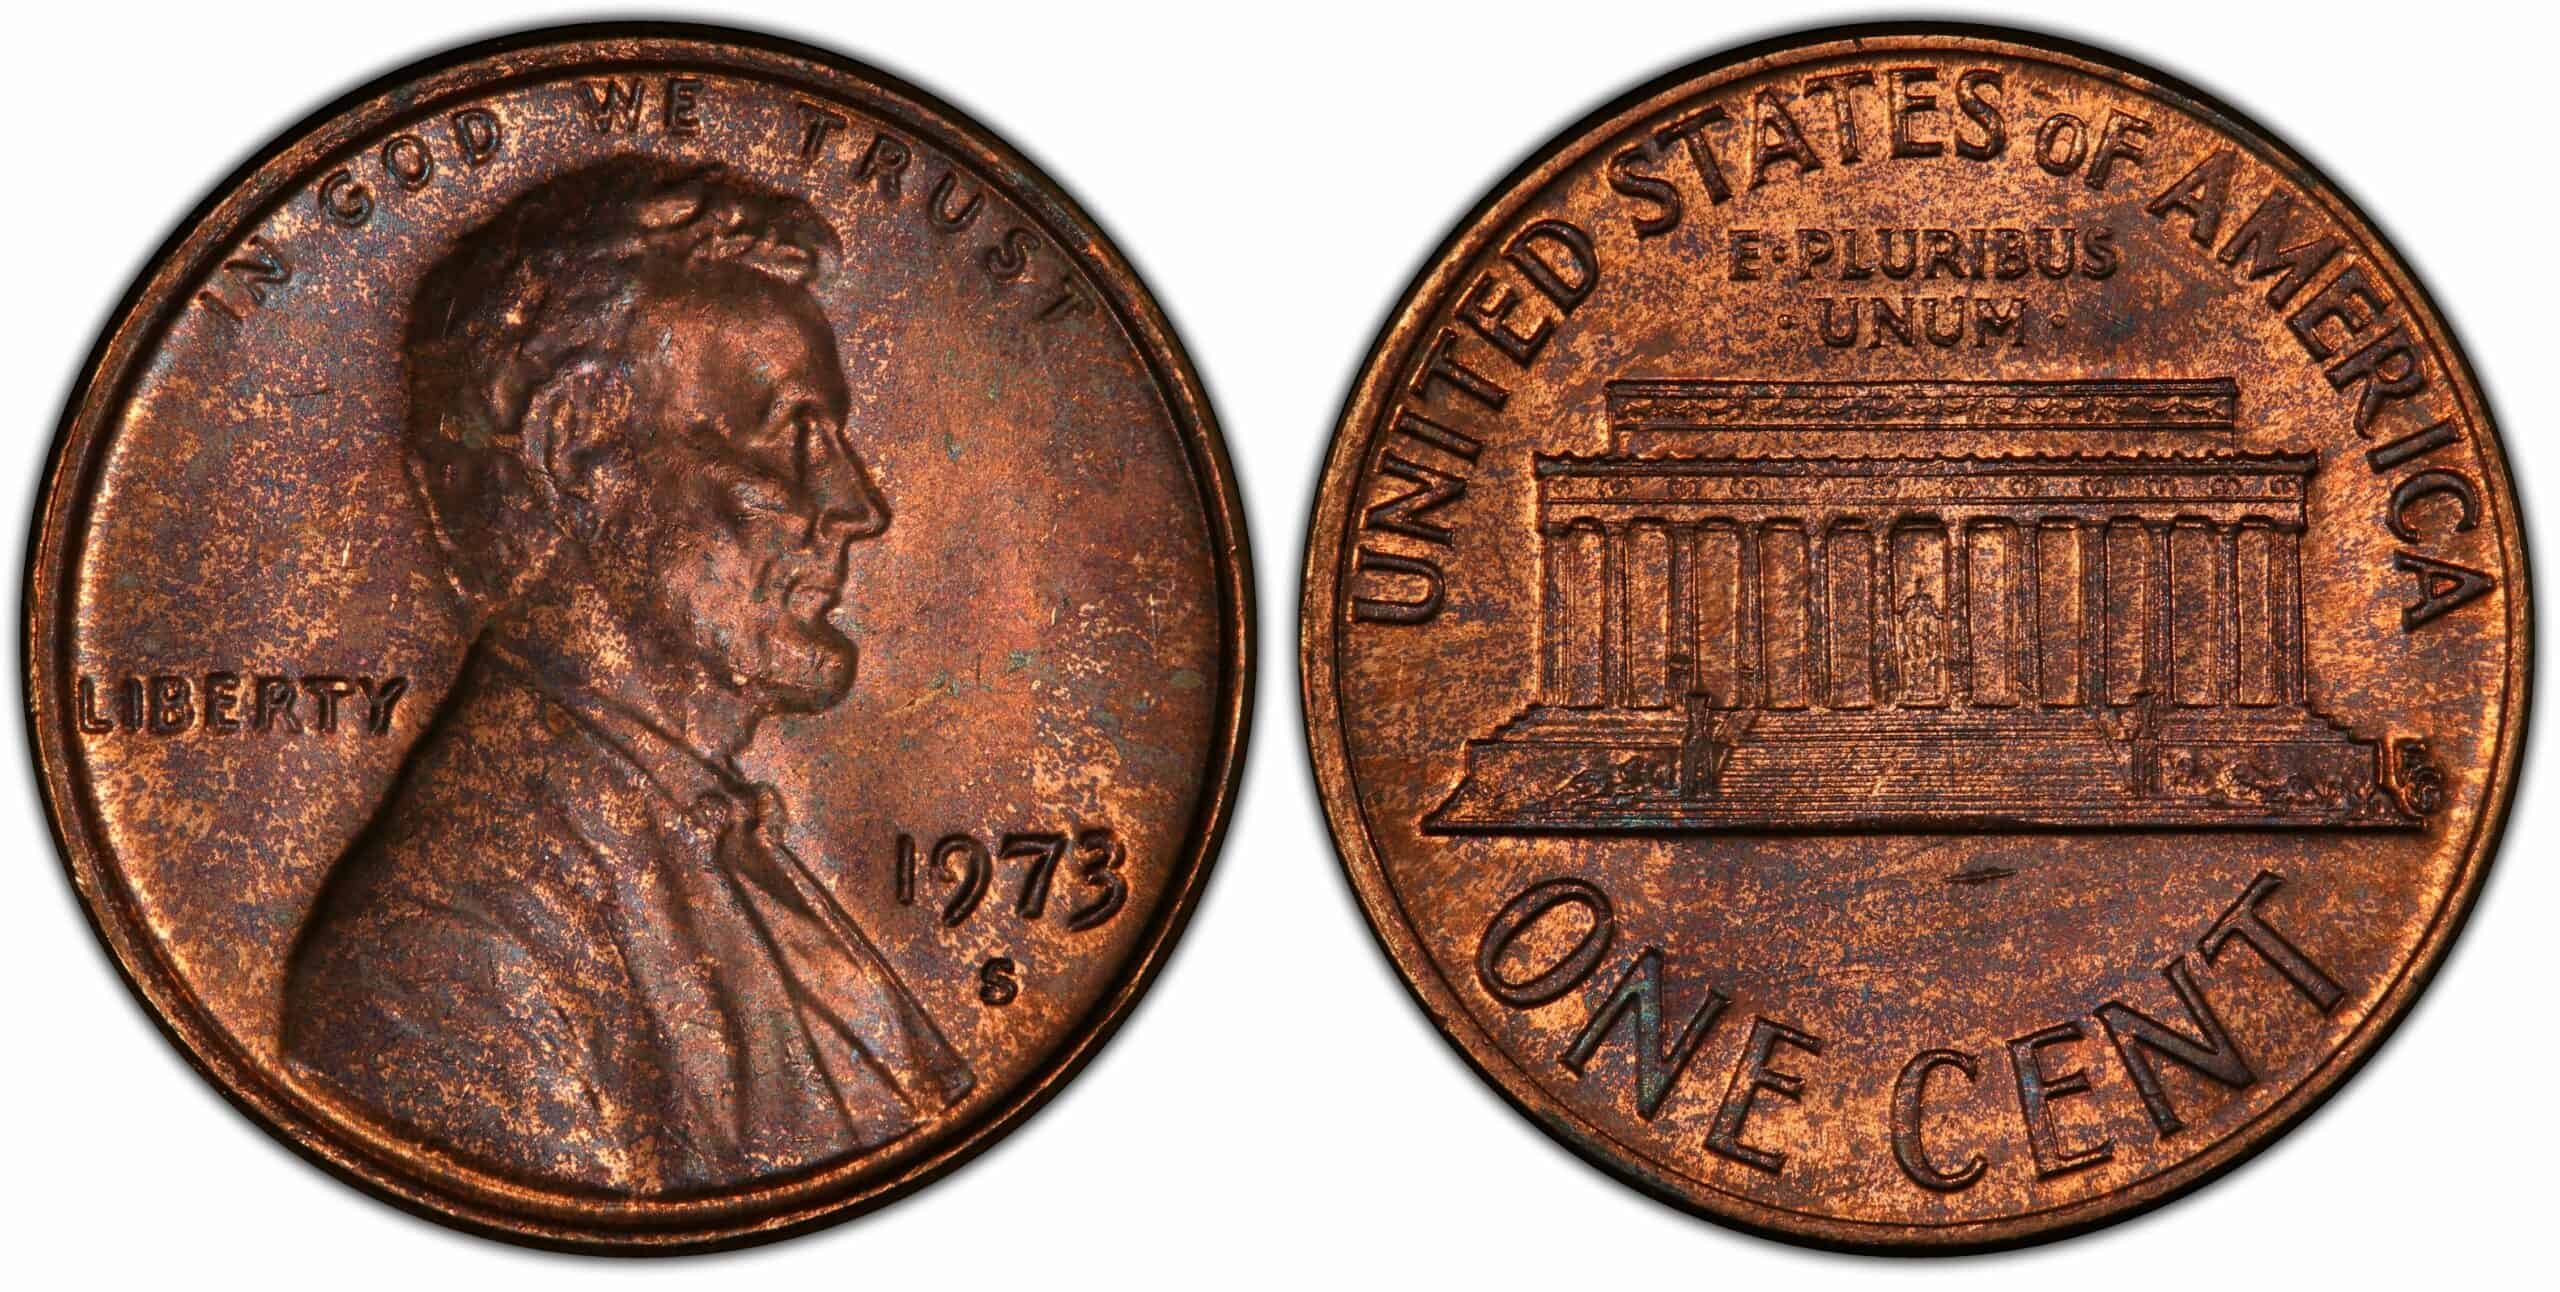 1973 “S” Penny Value